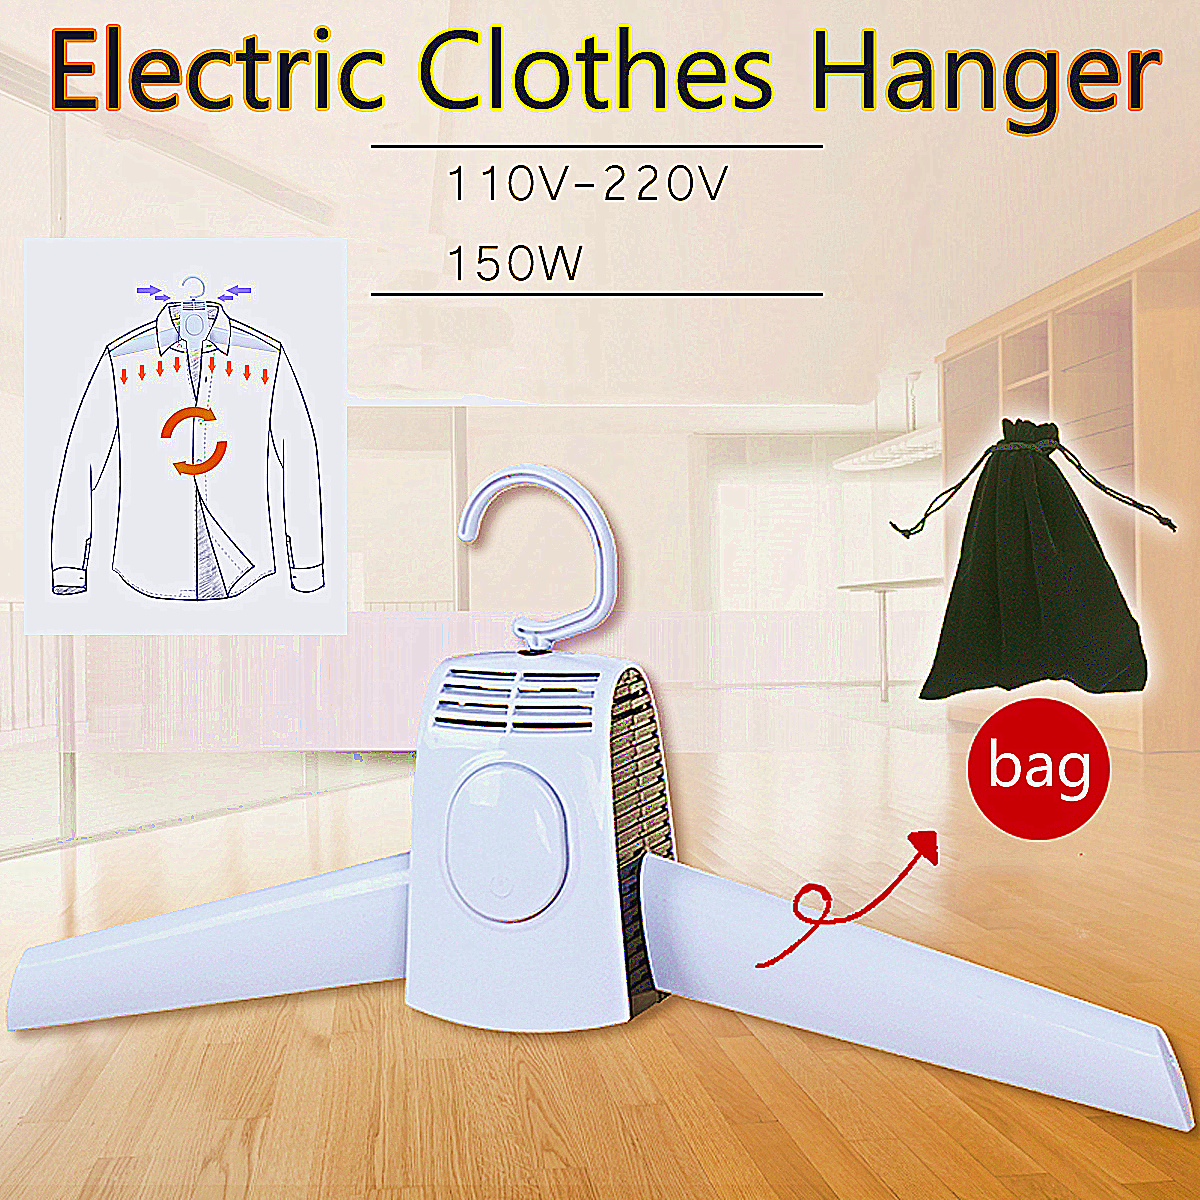 Portable Hangers Clothes Electric Laundry Dryer Smart Shoes Dryer Rack Coat For Winter Home Travel Rod Rack Hangers